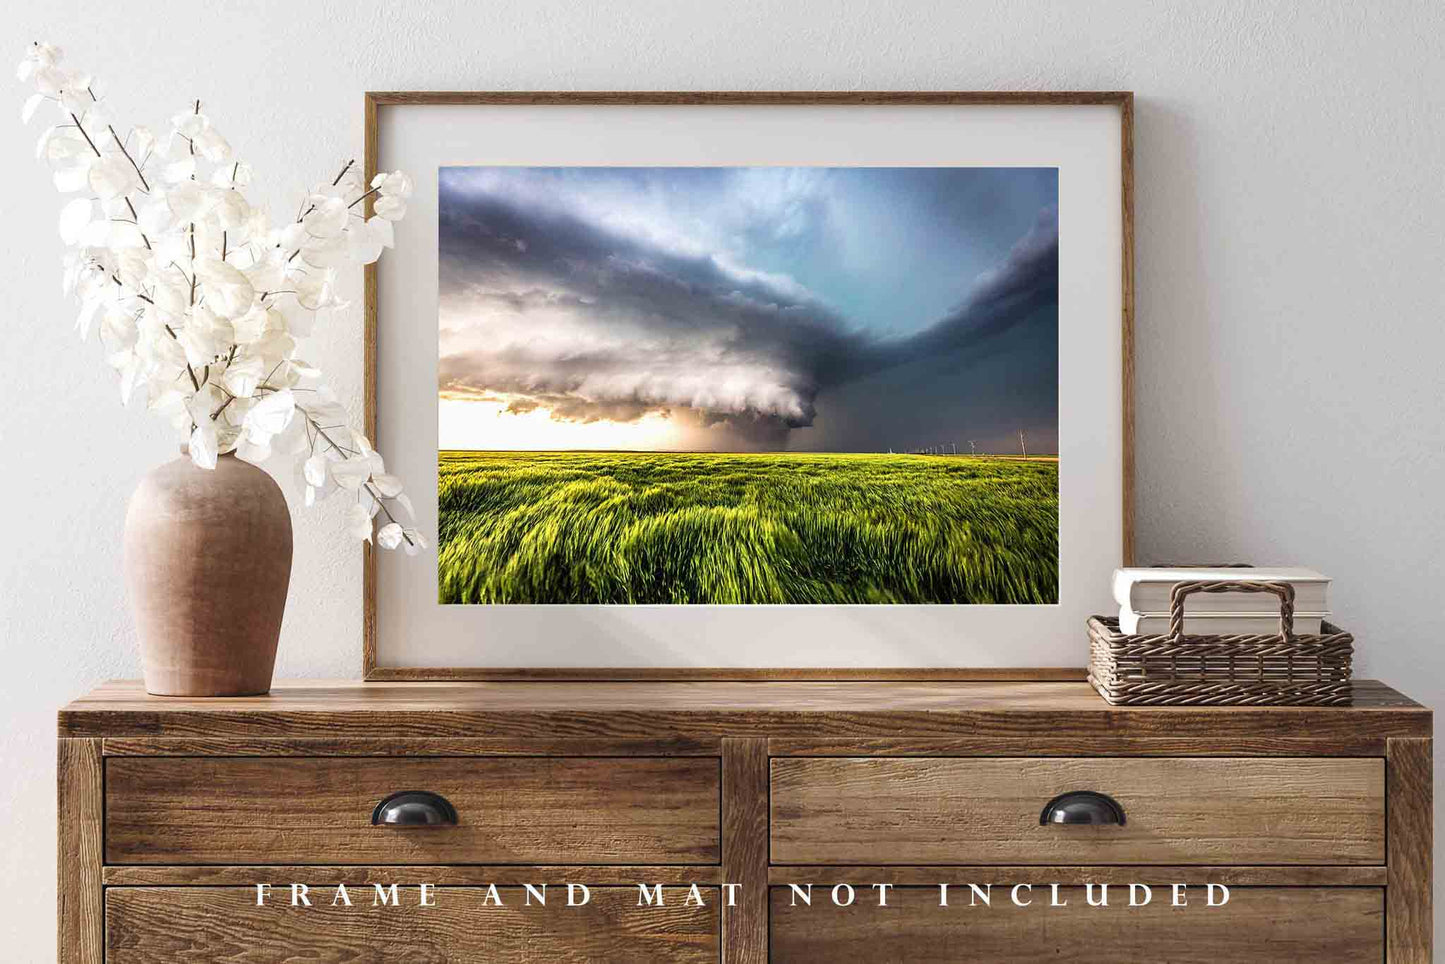 Storm Photography Print (Not Framed) Picture of Supercell Thunderstorm Over Waving Wheat Field on Stormy Spring Day in Kansas Great Plains Wall Art Weather Decor